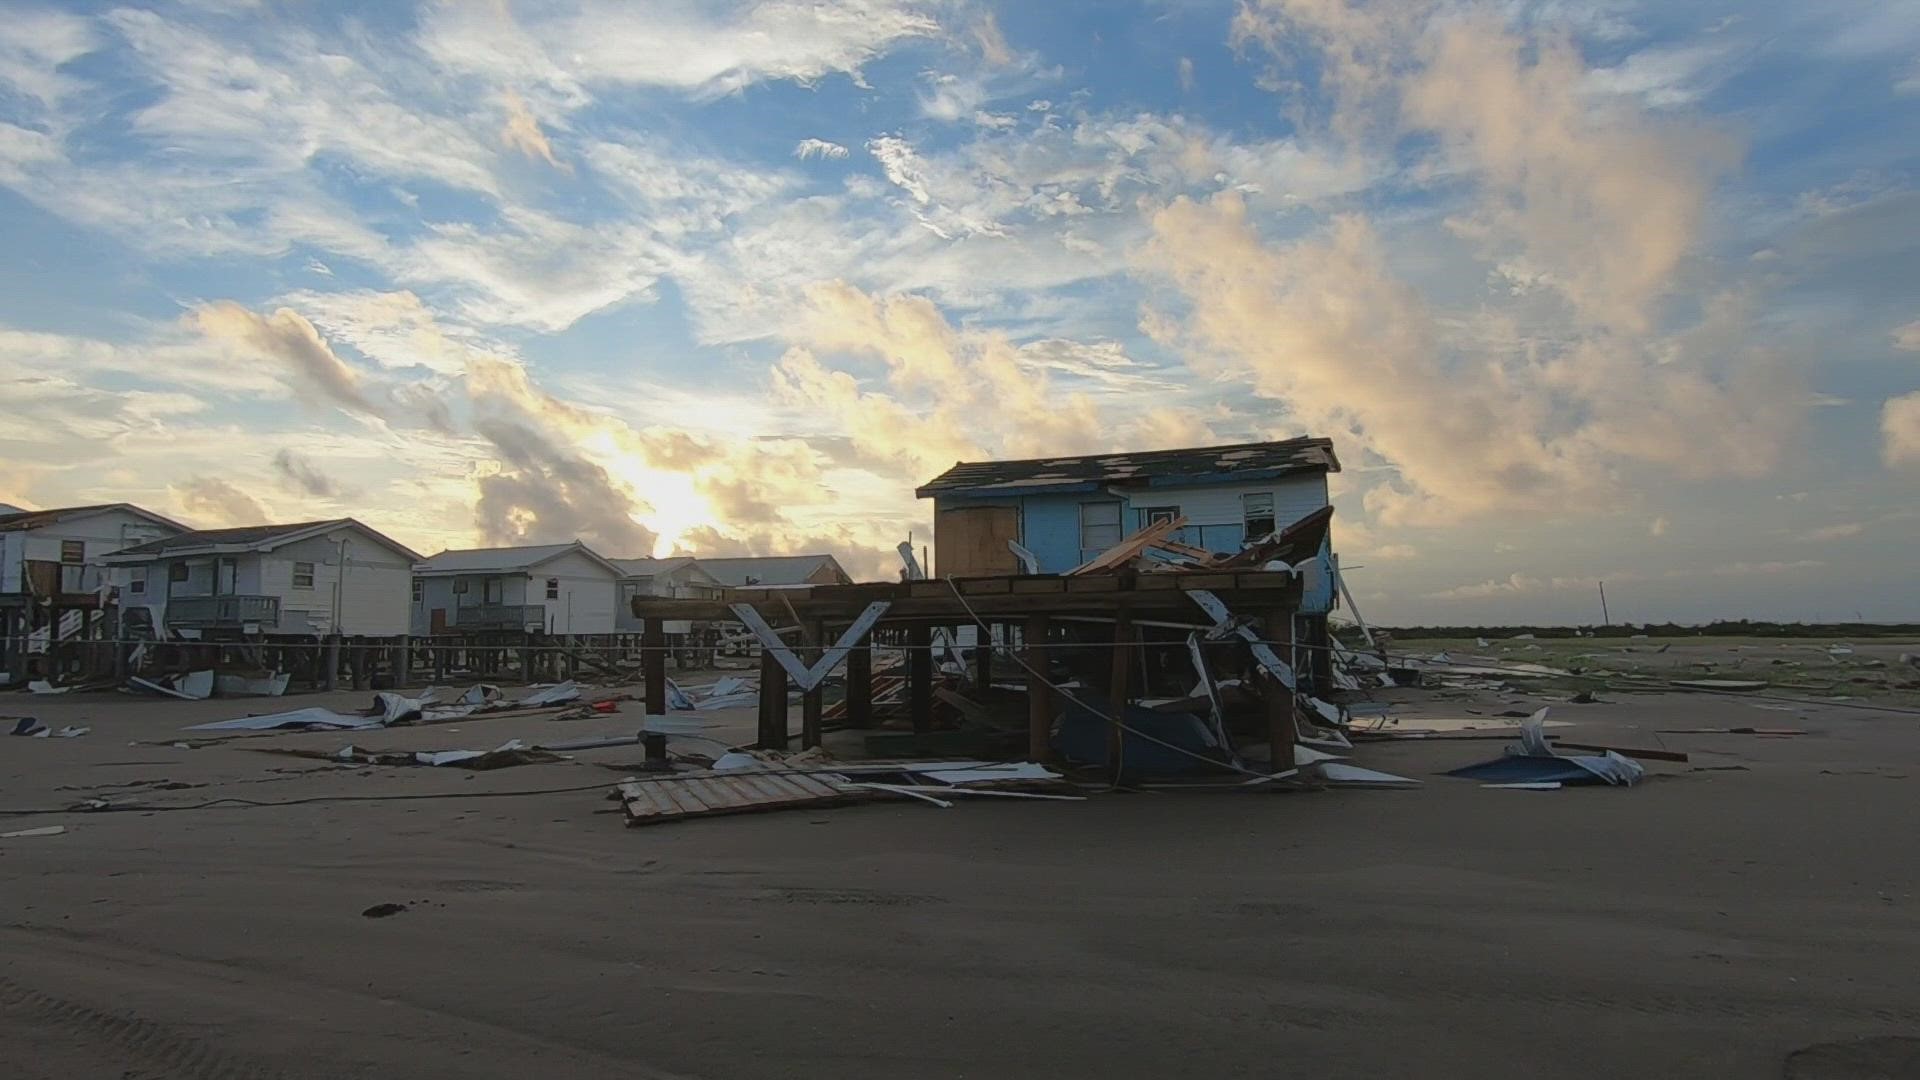 A WWL-TV crew drove around part of Grand Isle Wednesday to survey the damage.